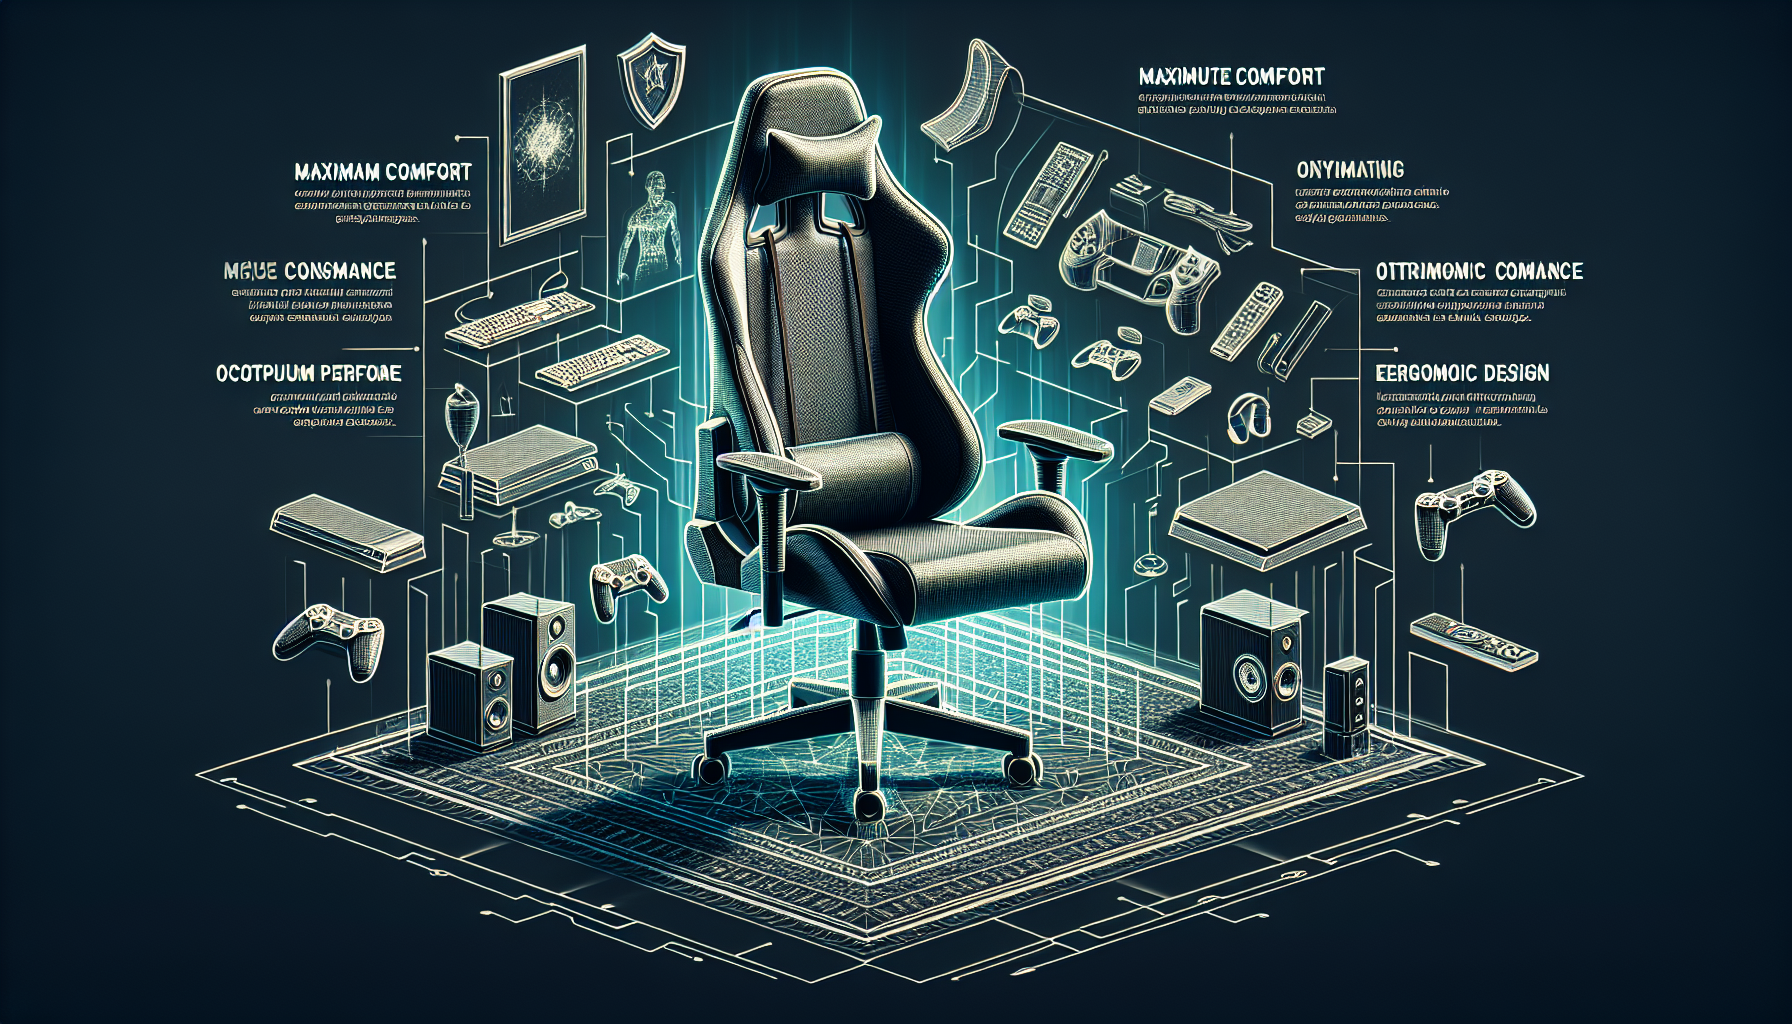 find the perfect gaming chair for the ultimate comfort and performance with our top tips and recommendations.